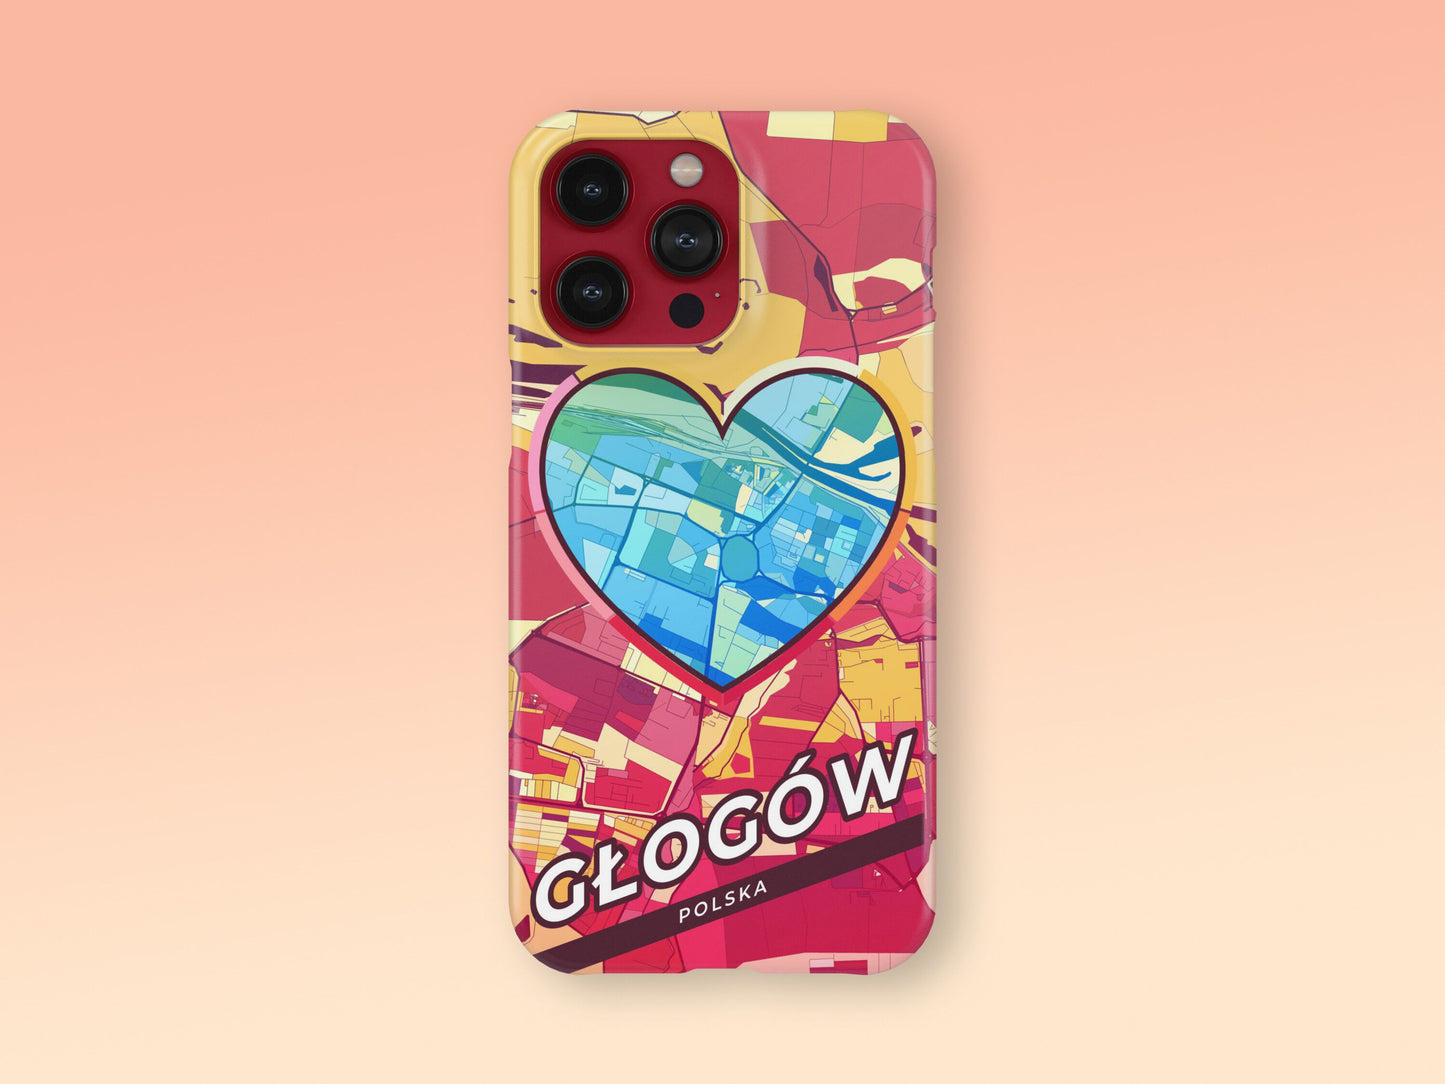 Głogów Poland slim phone case with colorful icon. Birthday, wedding or housewarming gift. Couple match cases. 2